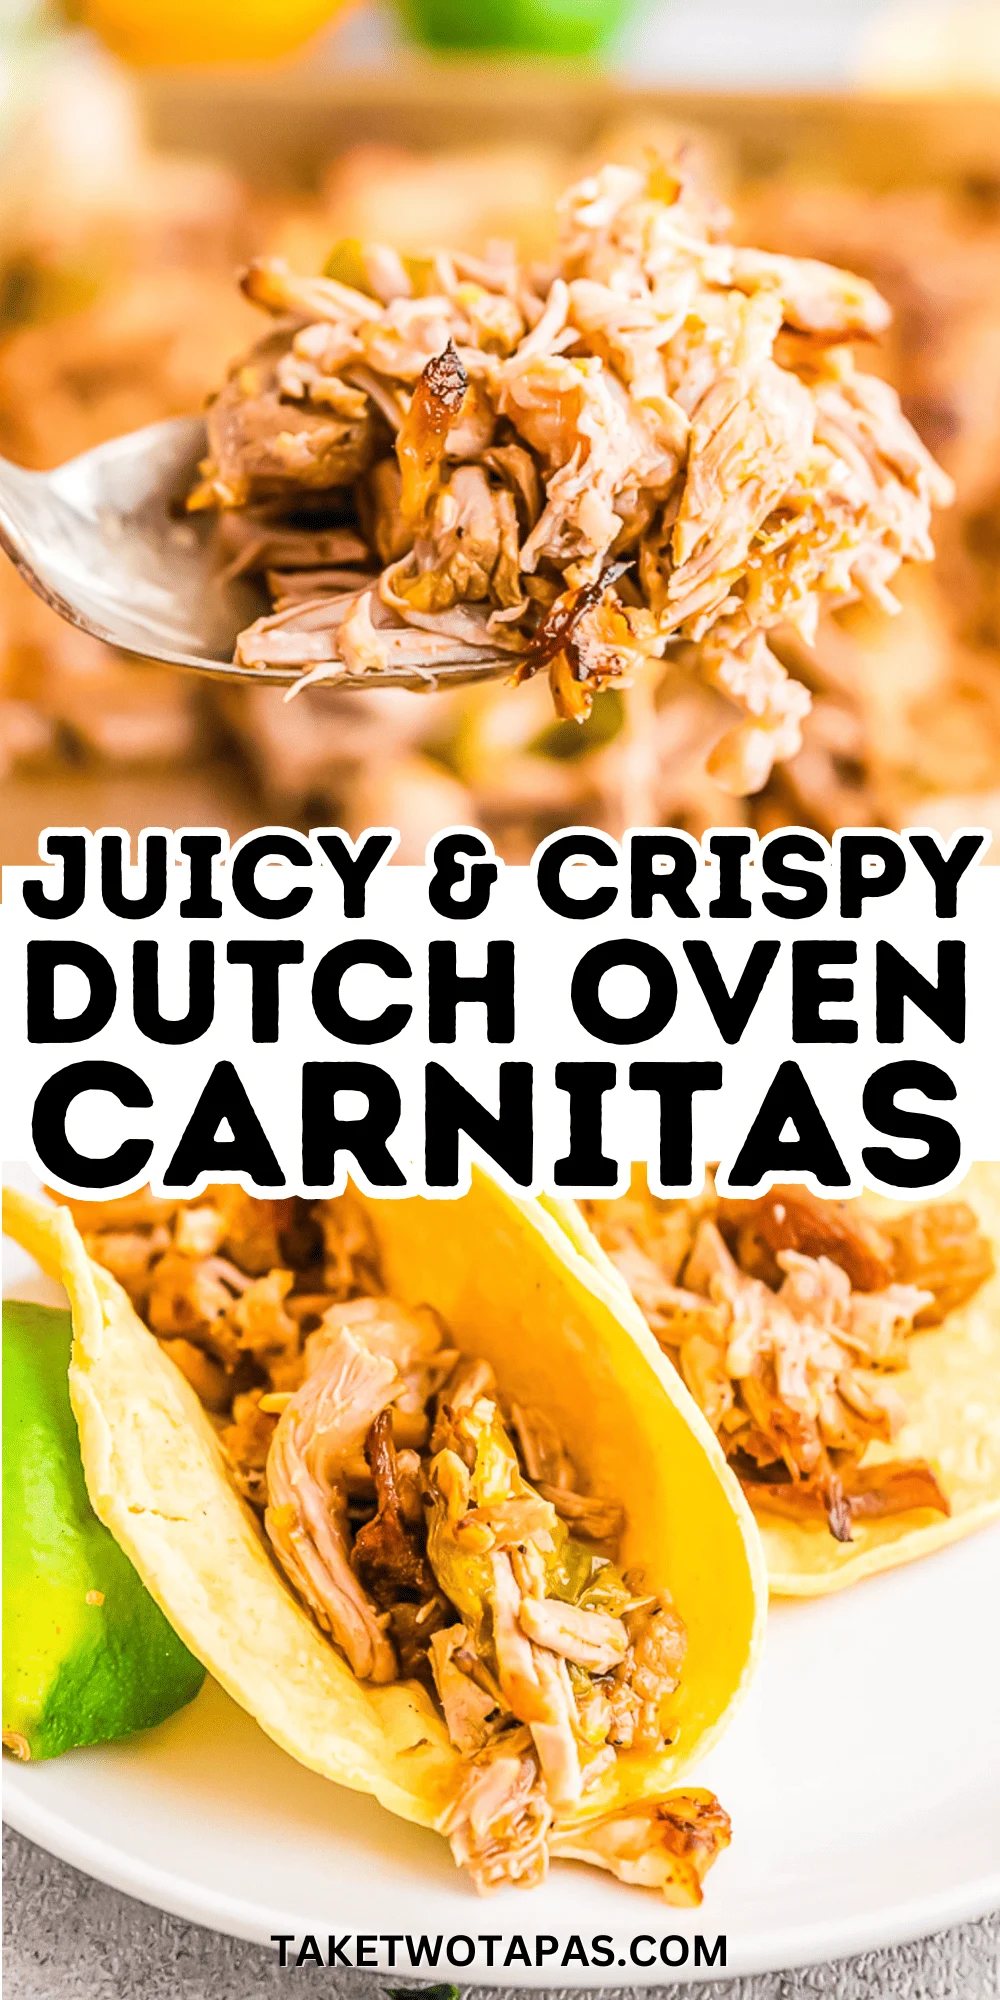 dutch oven carnitas are great for a party as sliders or as an easy meal on Taco Tuesday